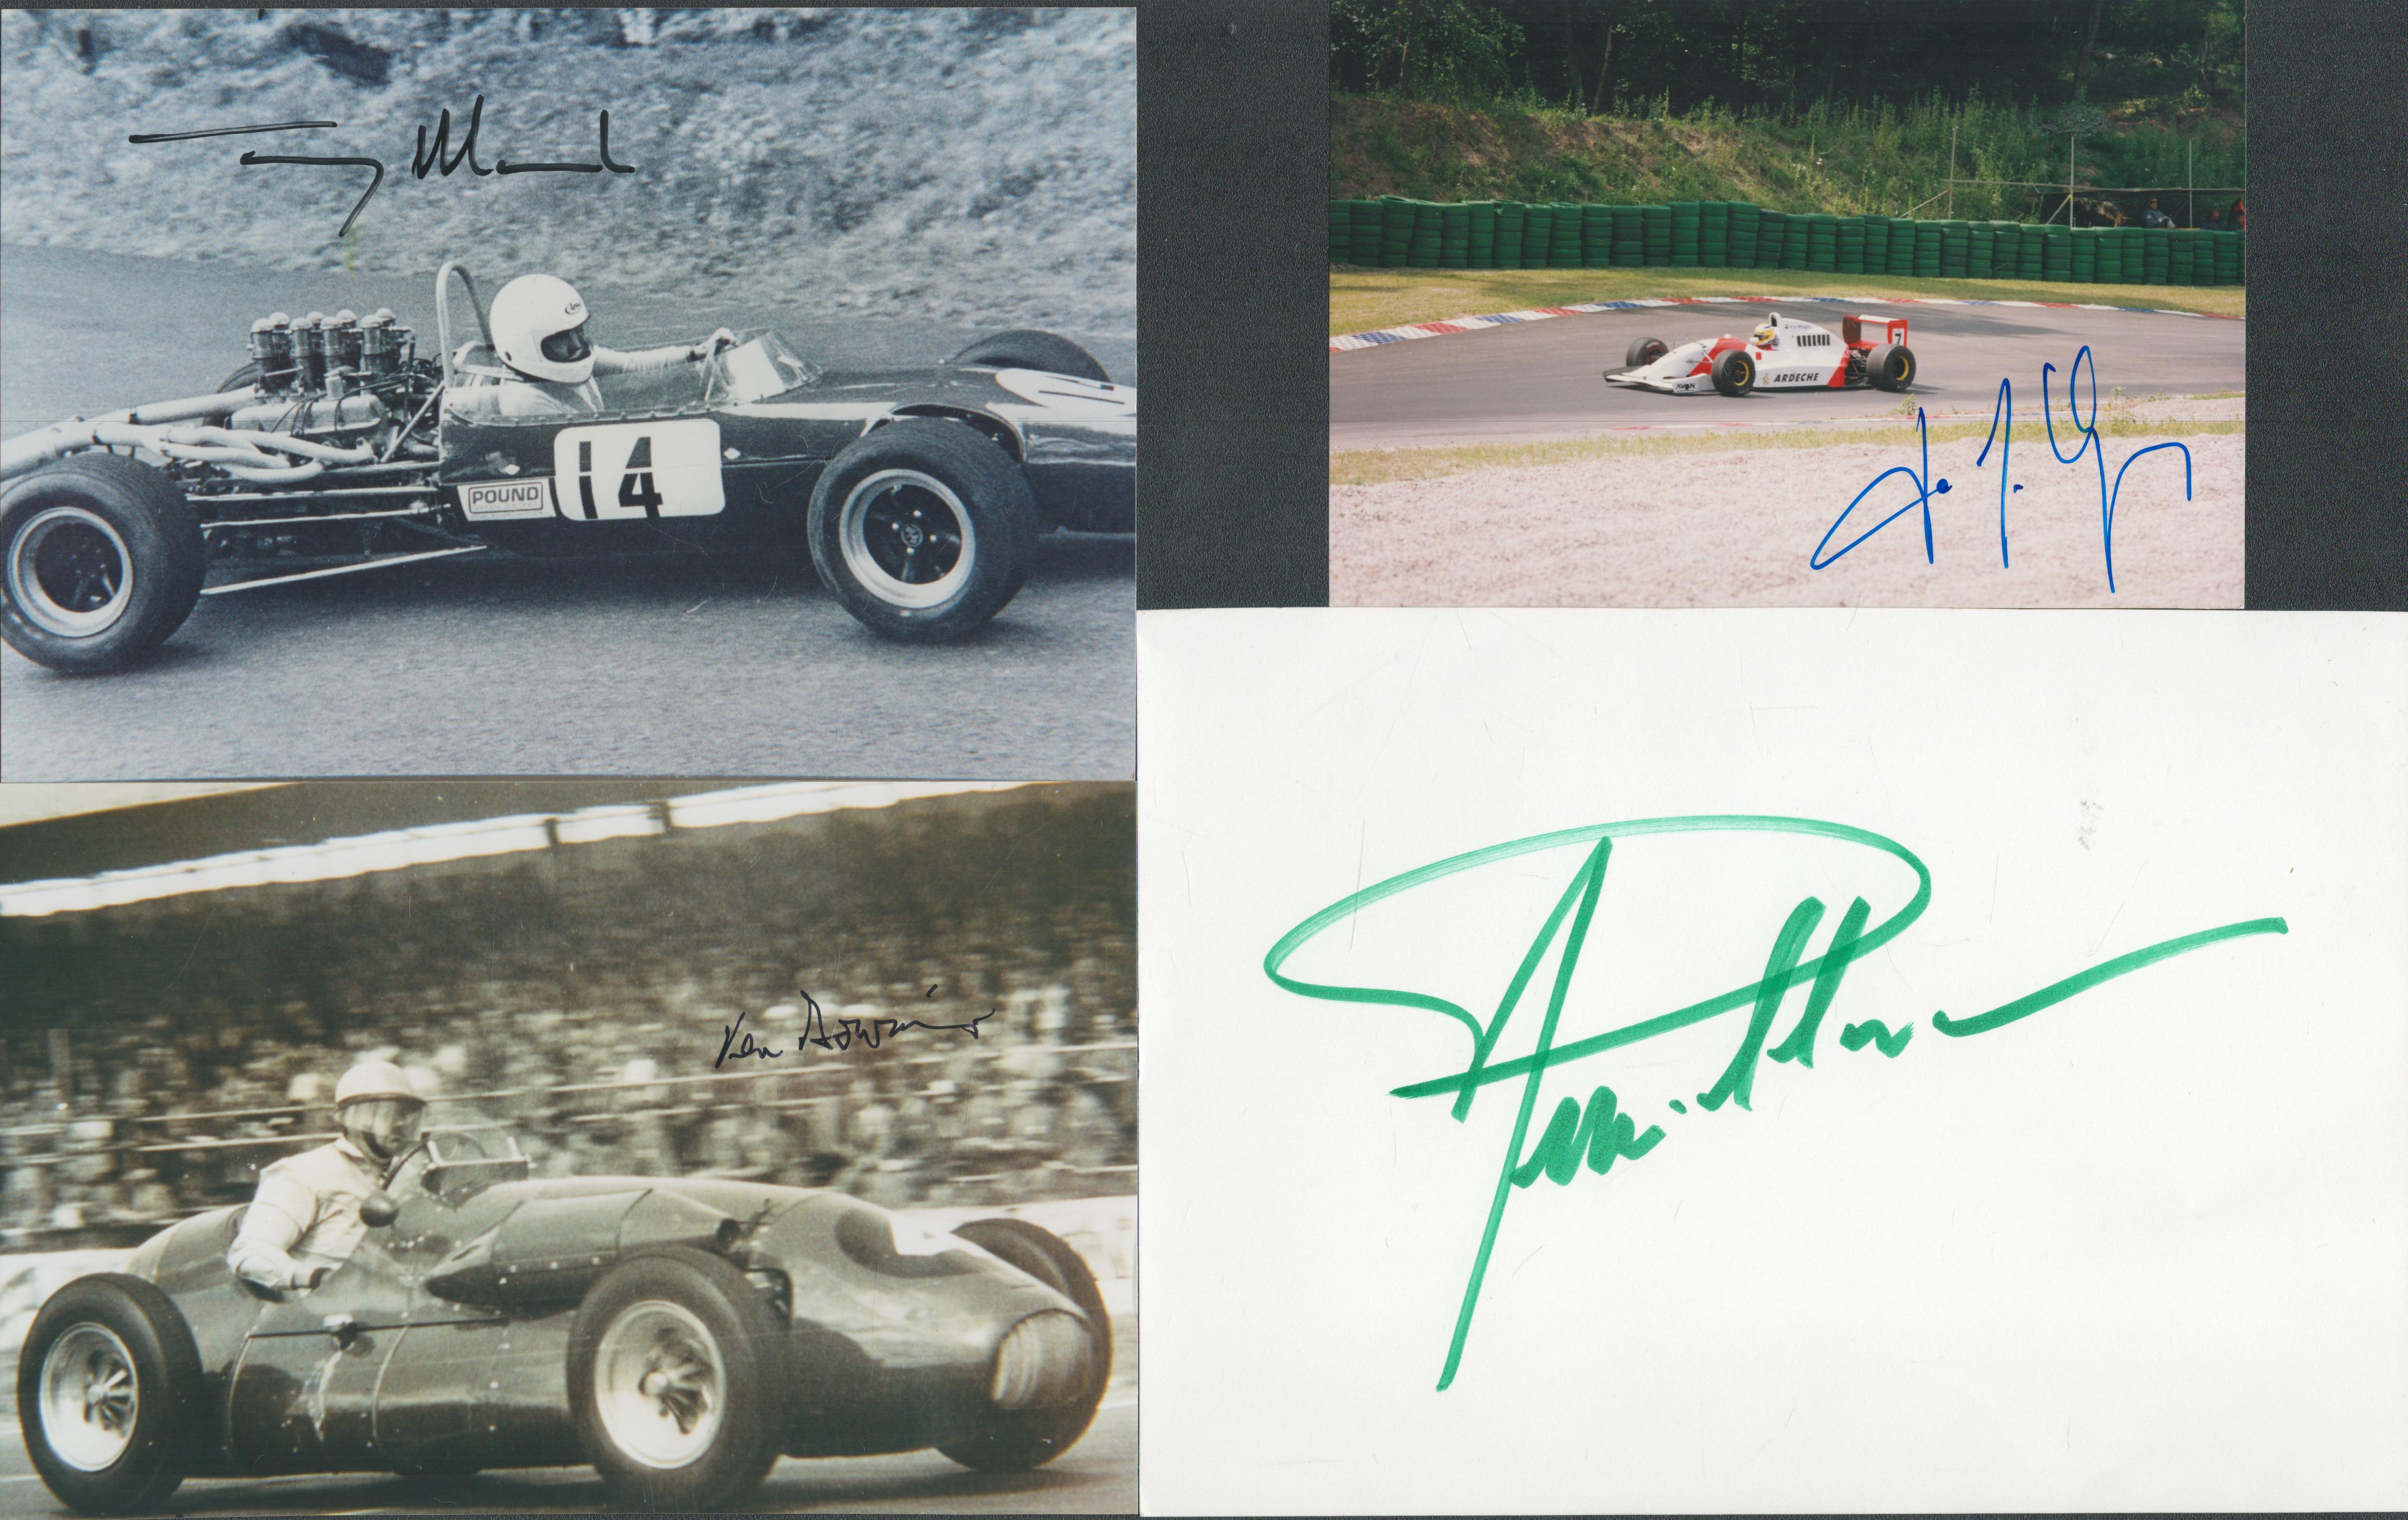 Motor Racing collection 10 assorted signed promo photo, vintage photos and album page includes